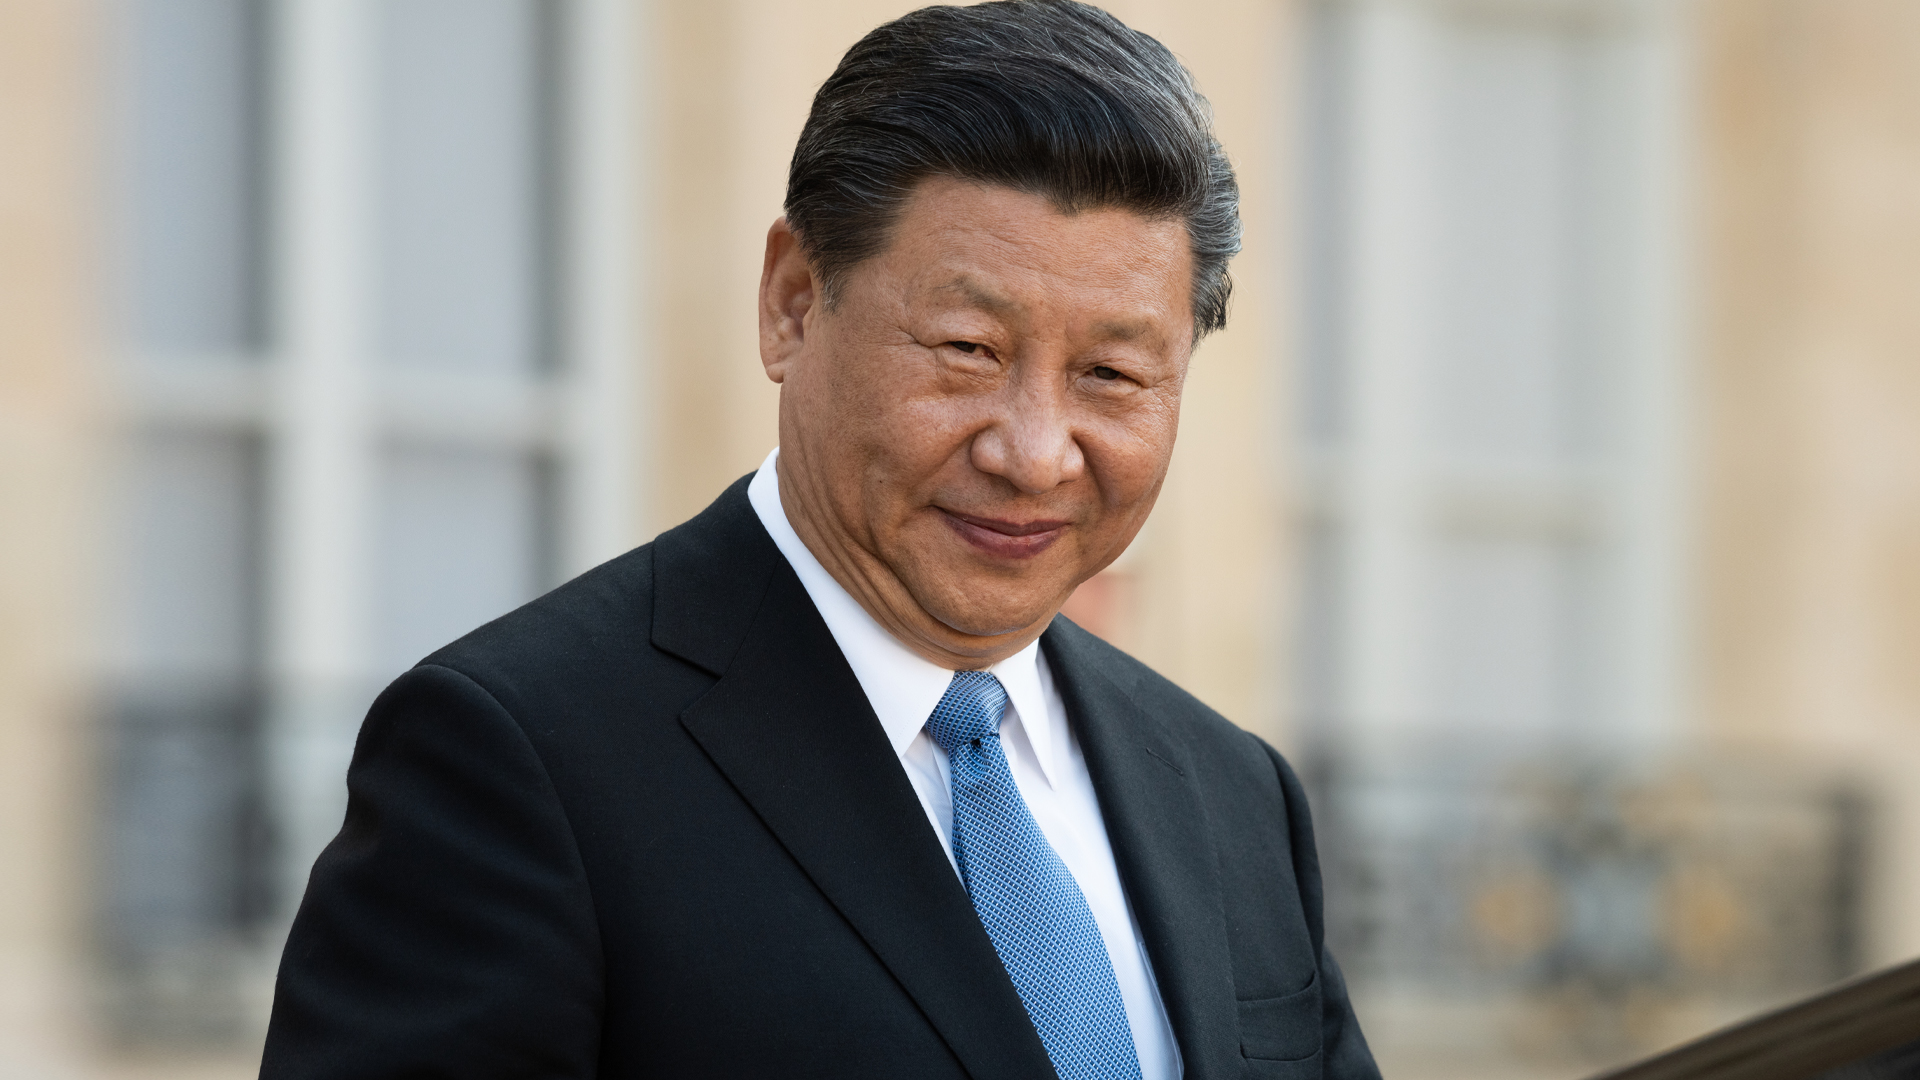 Top 3 things that government affairs leads need-to-know from the Chinese President’s trip to the UAE